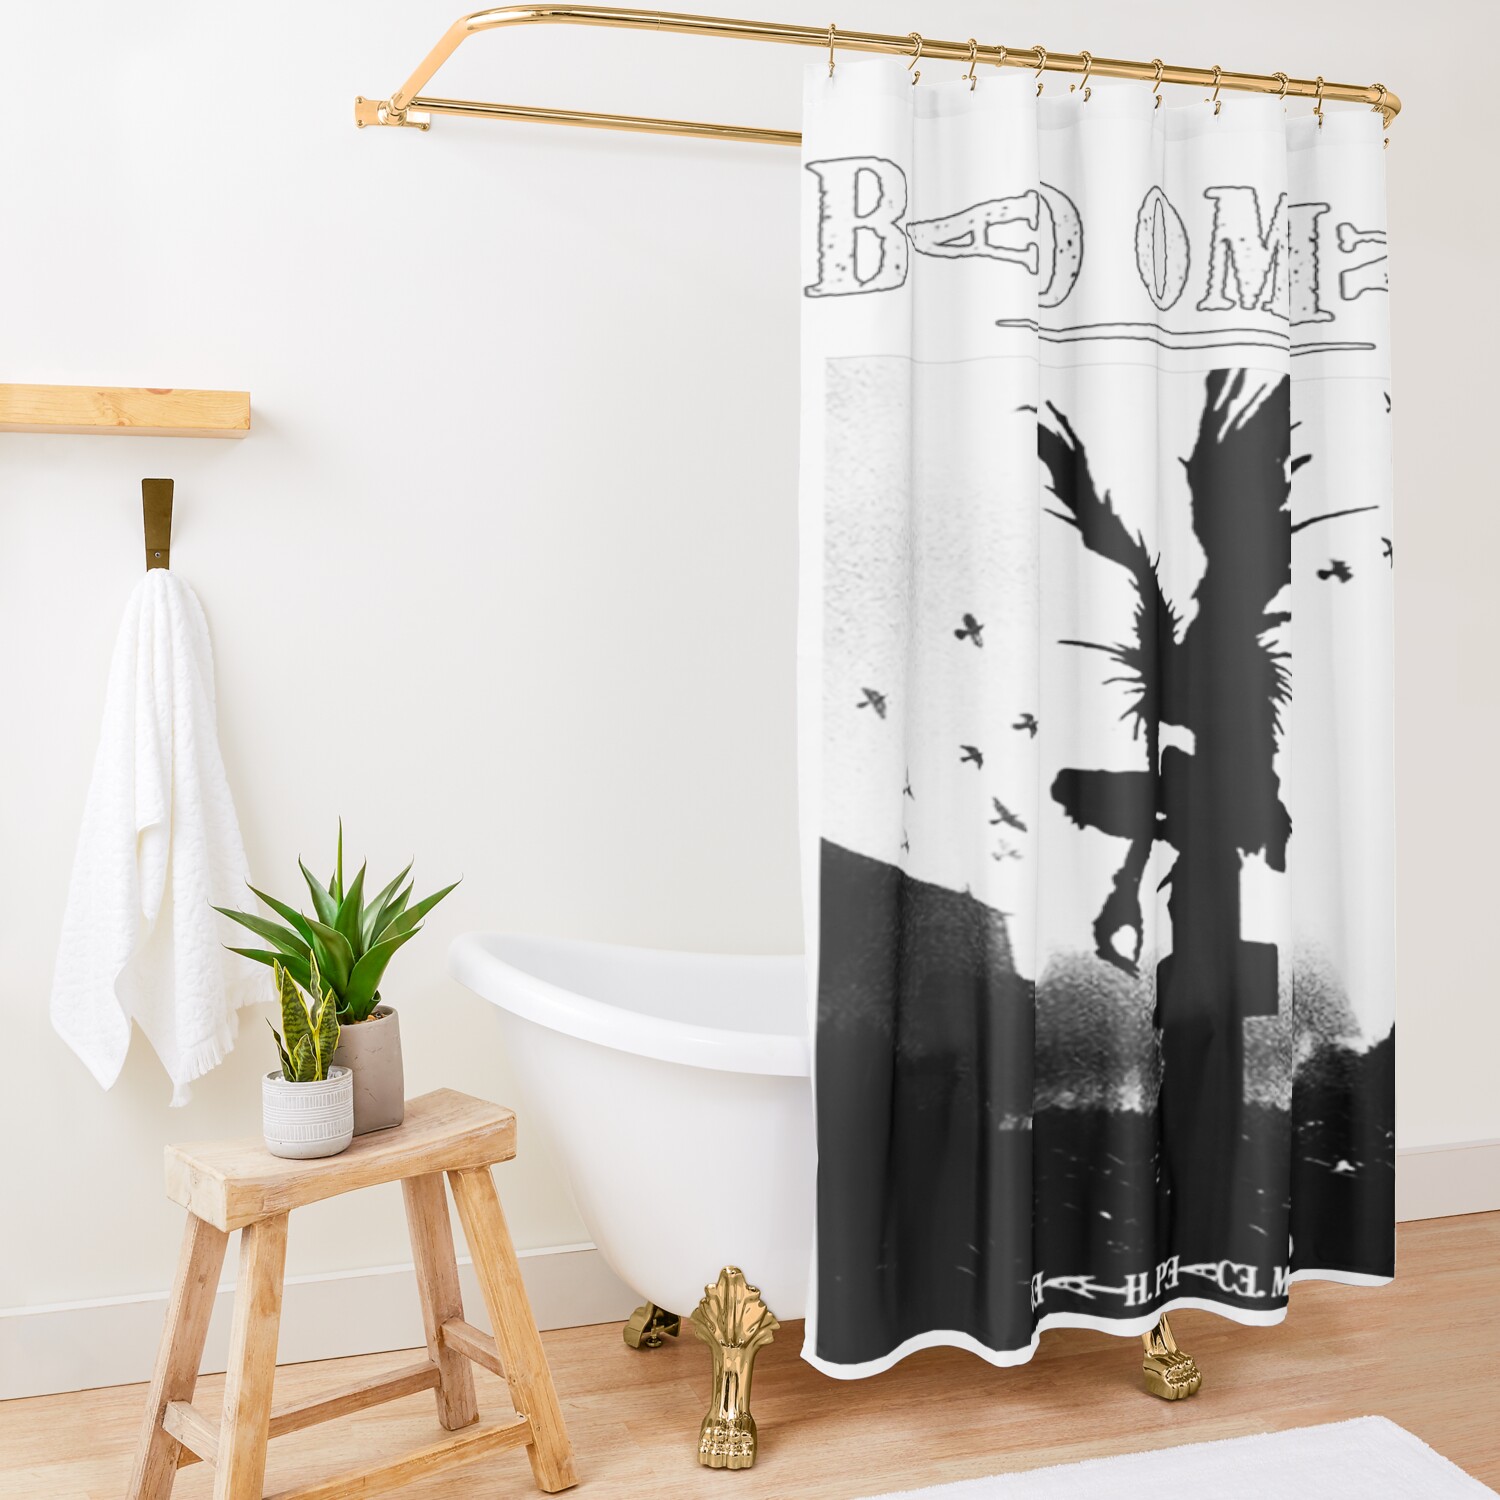 urshower curtain opensquare1500x1500 2 - Bad Omens Shop